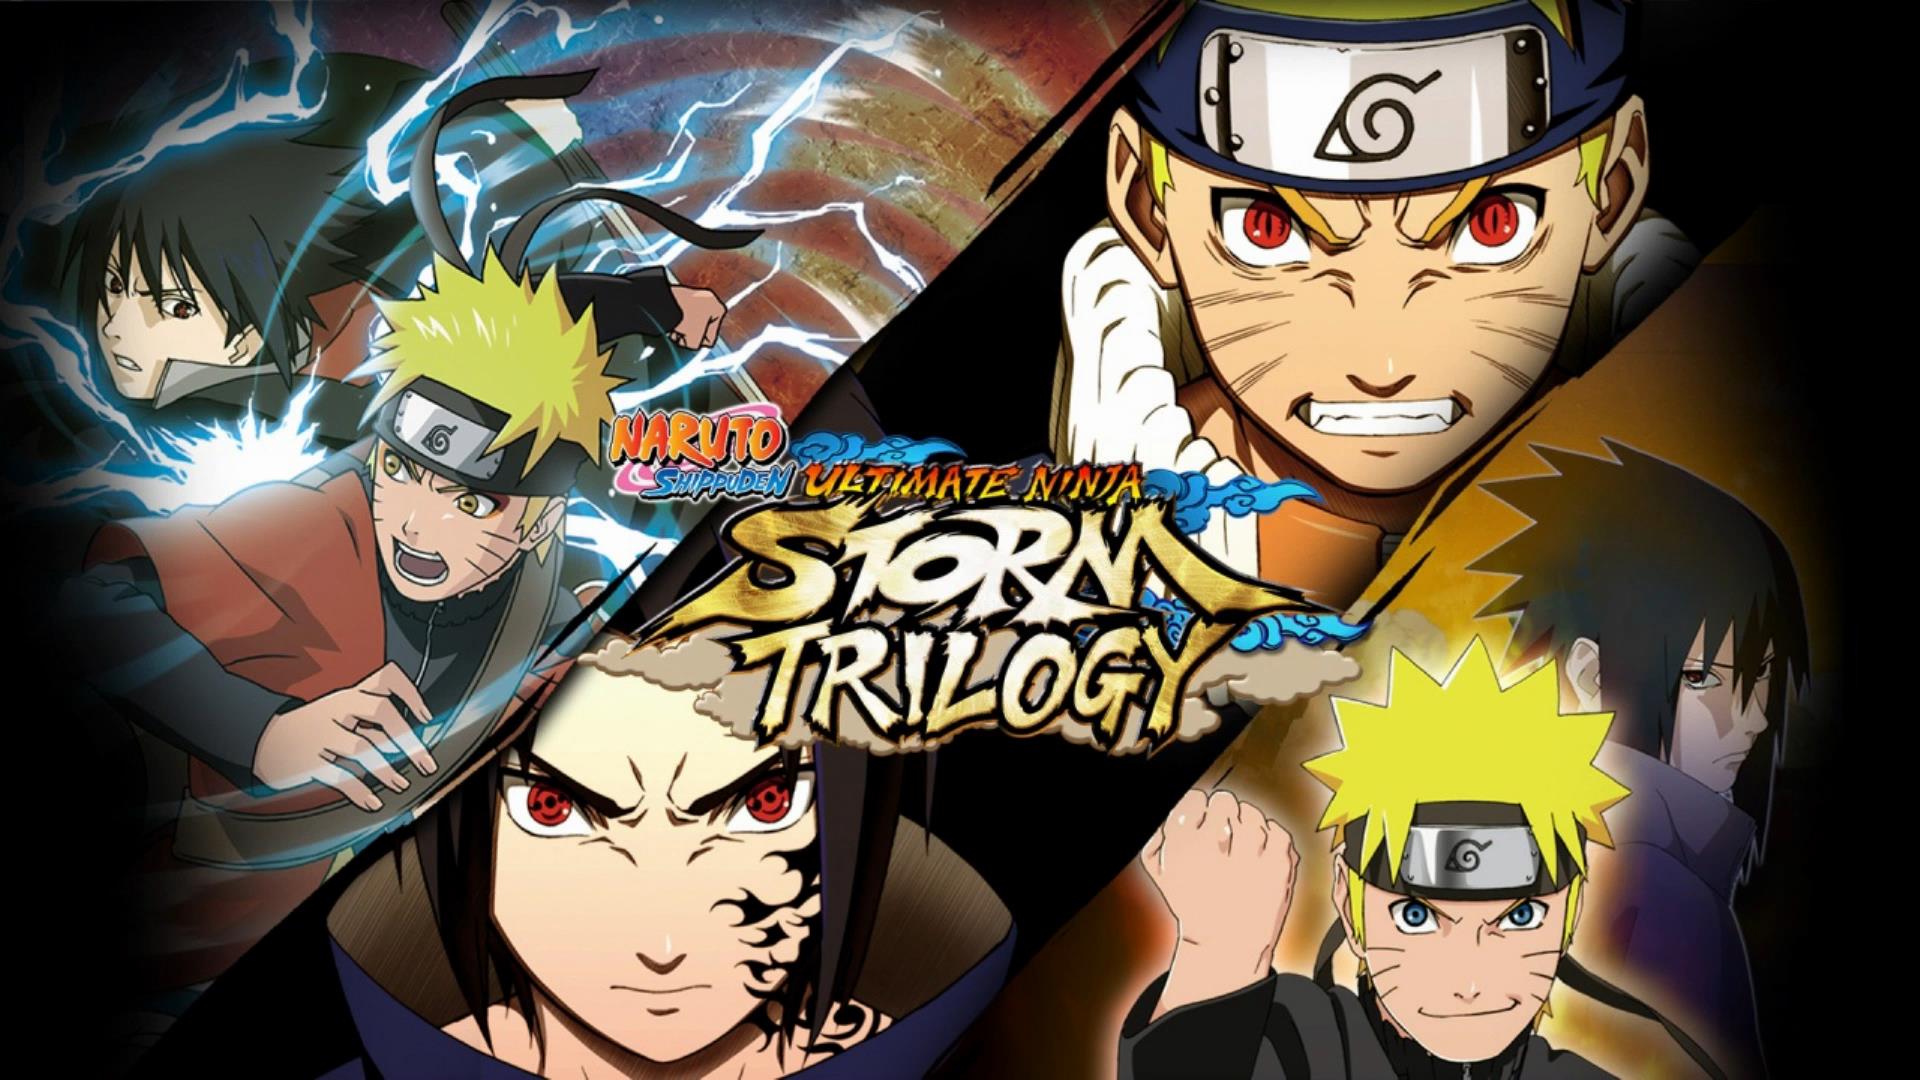 Naruto Shippuden: Ultimate Ninja Storm Trilogy will be offered as individual games on the Switch eShop